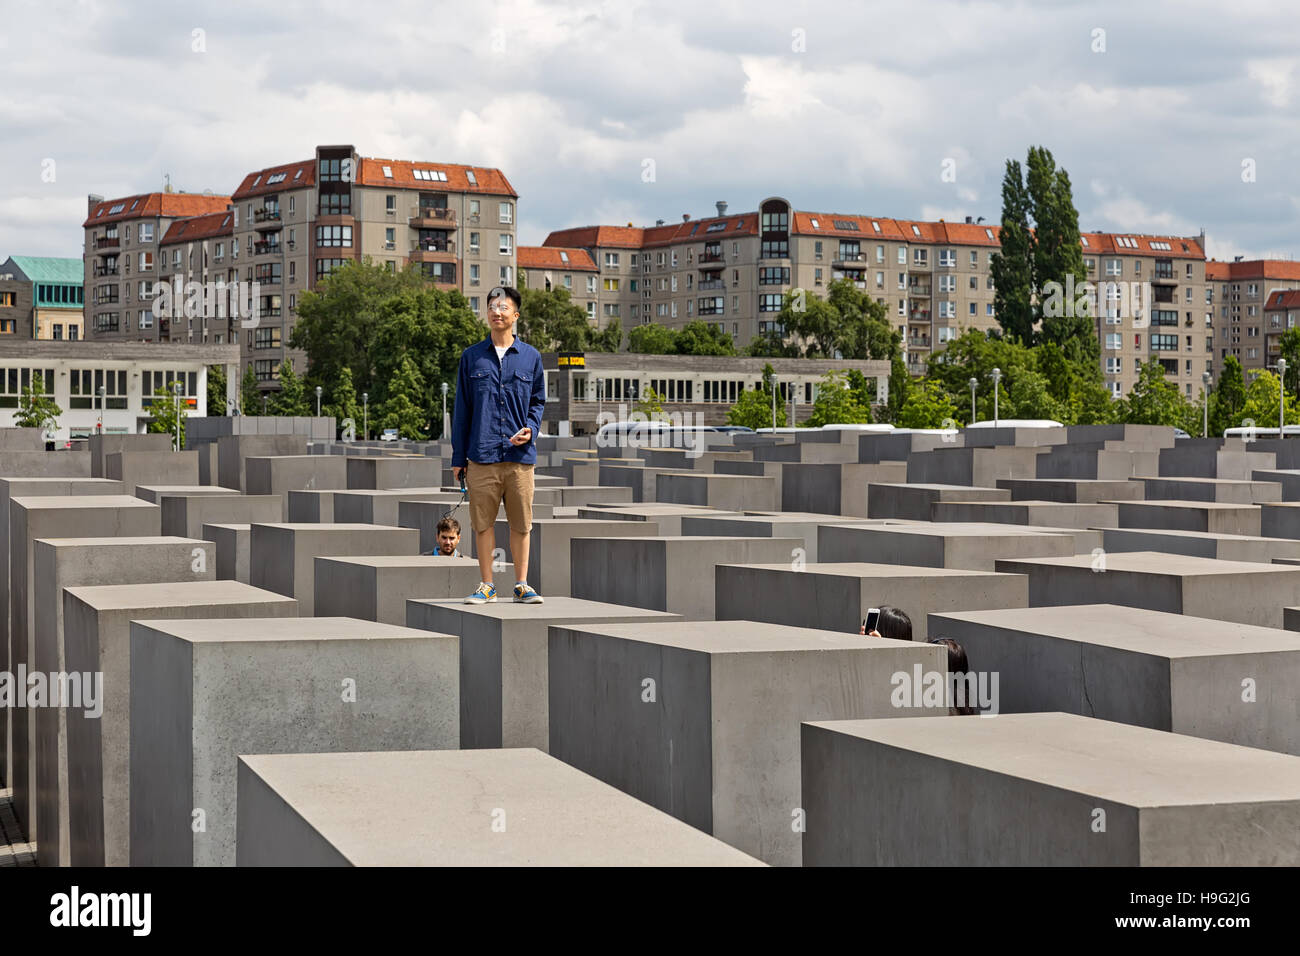 BERLIN, GERMANY - JULY 2015:  View of famous Jewish Holocaust Memorial near Brandenburg Gate in summer on July 27, 2015 in Berlin Mitte, Germany Stock Photo